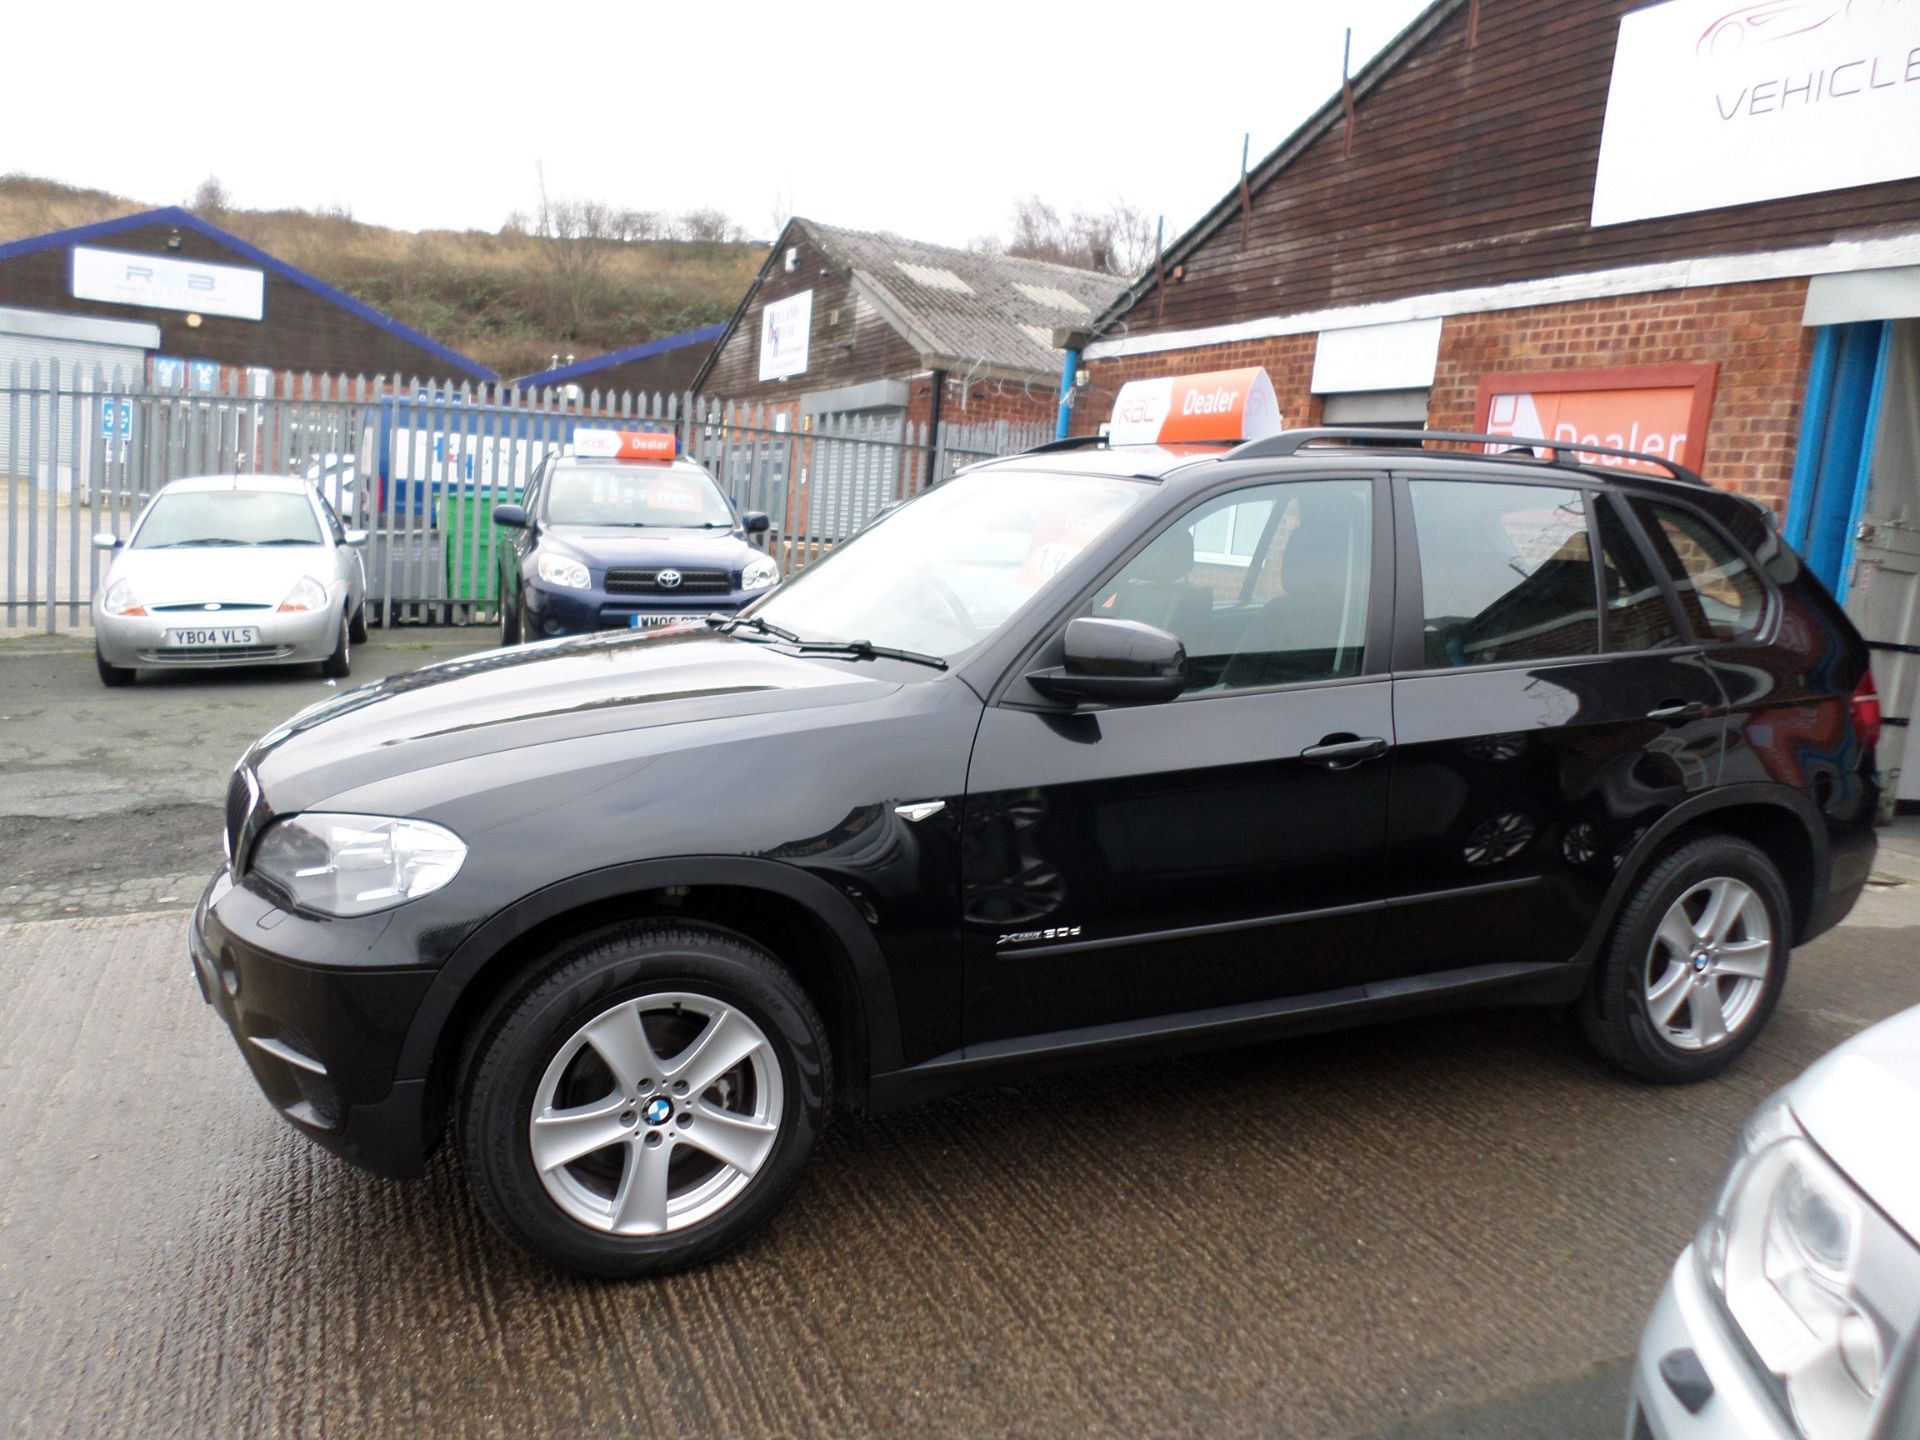 2012/12 REG BMW X5 XDRIVE 30D SE AUTOMATIC - ONLY 22K MILES, SHOWING 1 FORMER KEEPER *NO VAT* - Image 4 of 11